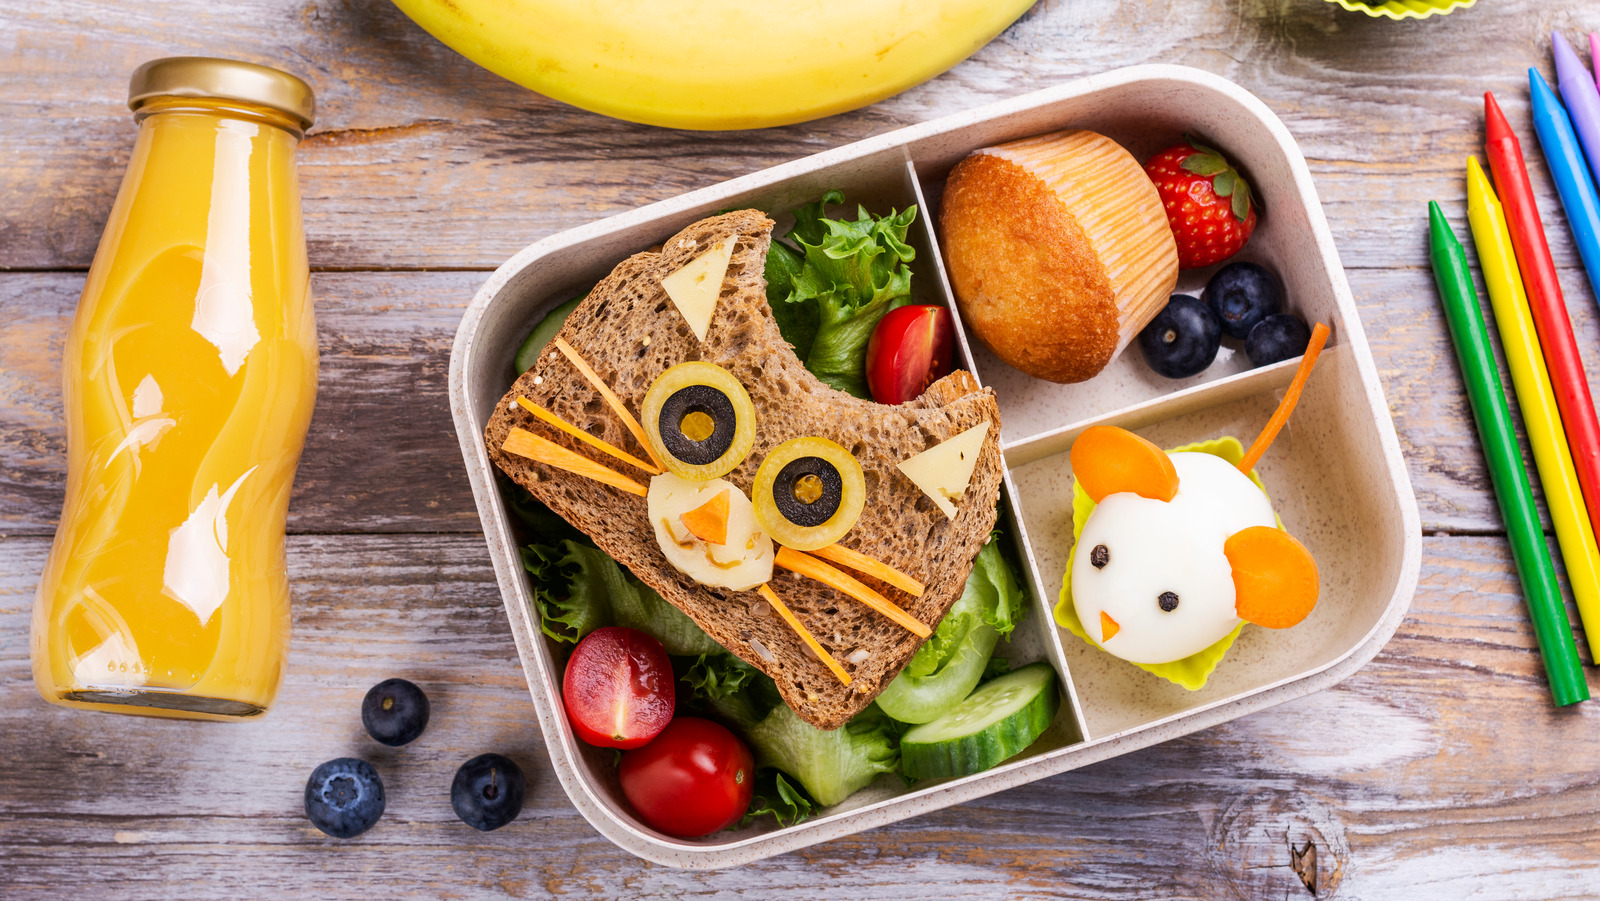 https://www.tastingtable.com/img/gallery/why-a-bento-style-box-is-a-creative-choice-for-school-lunches/l-intro-1660062704.jpg